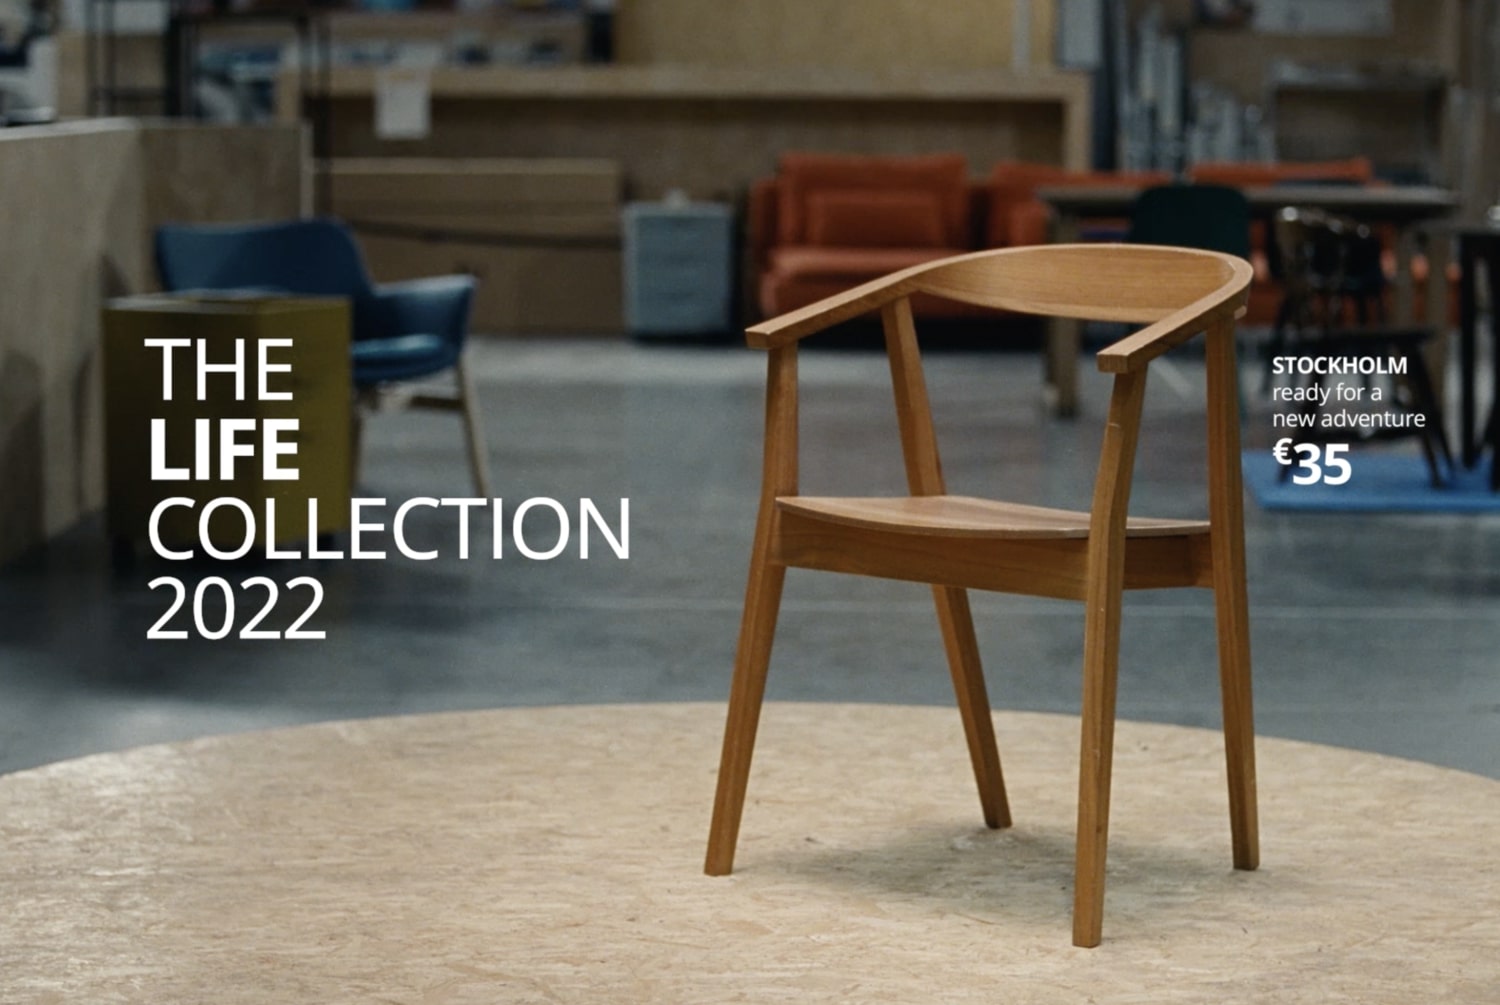 IKEA, The Life Collection 2022